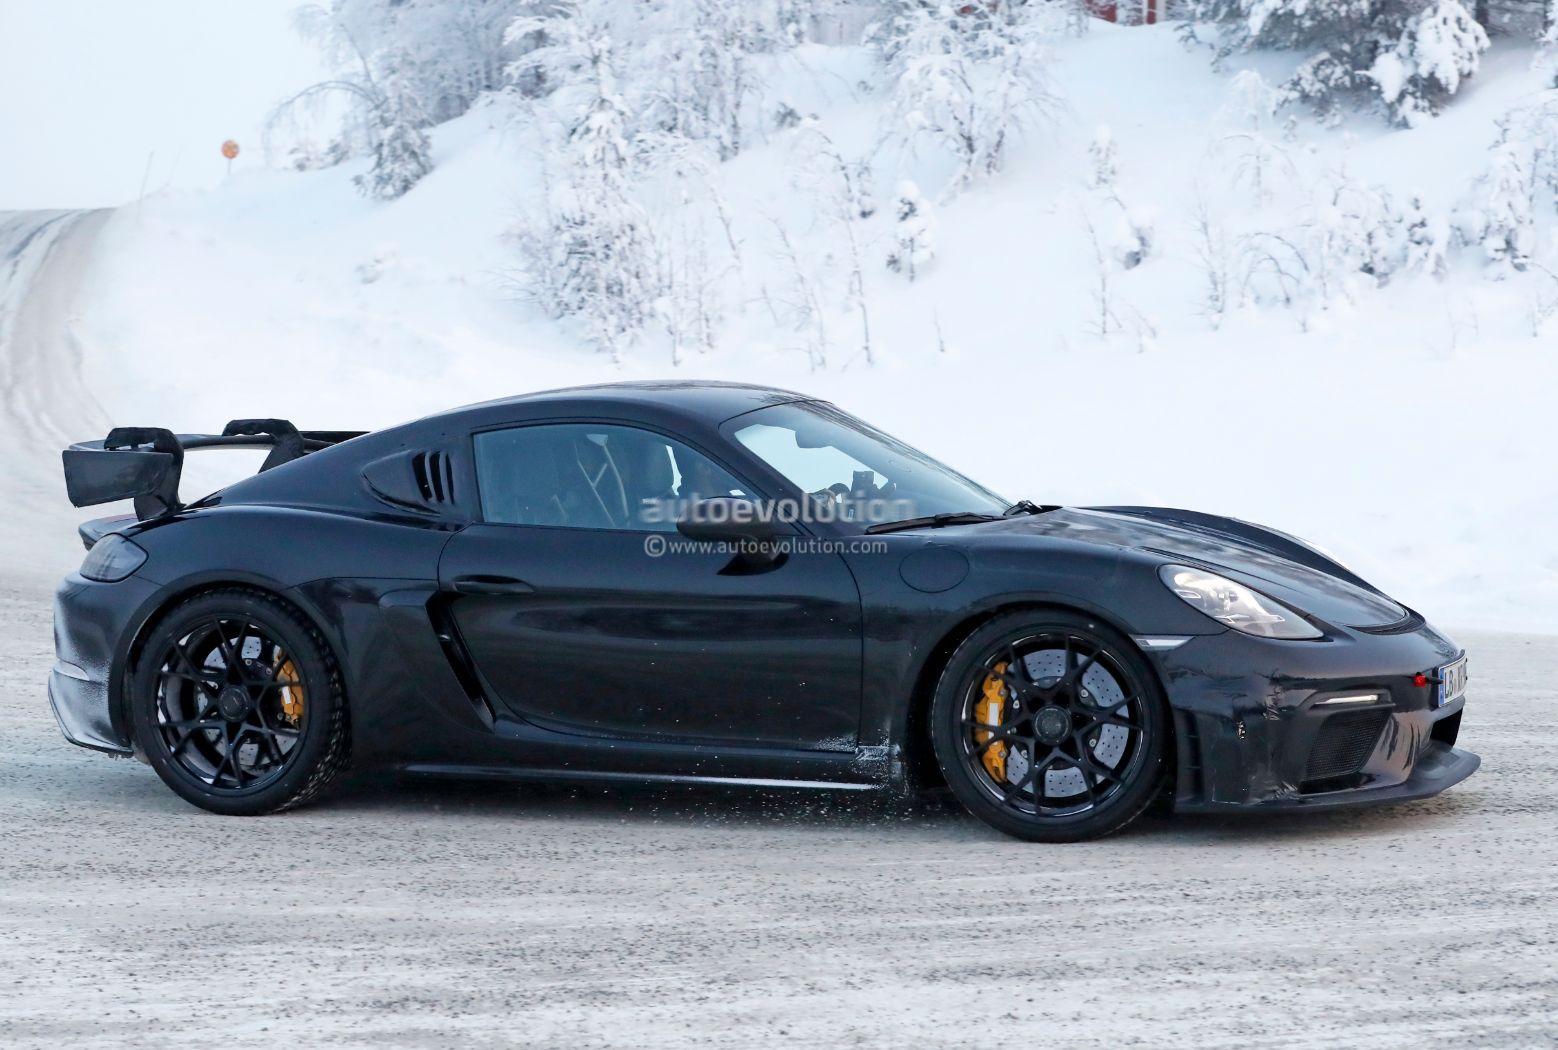 2022 Porsche 718 Cayman GT4 RS – What We Know About the Mid-Engine